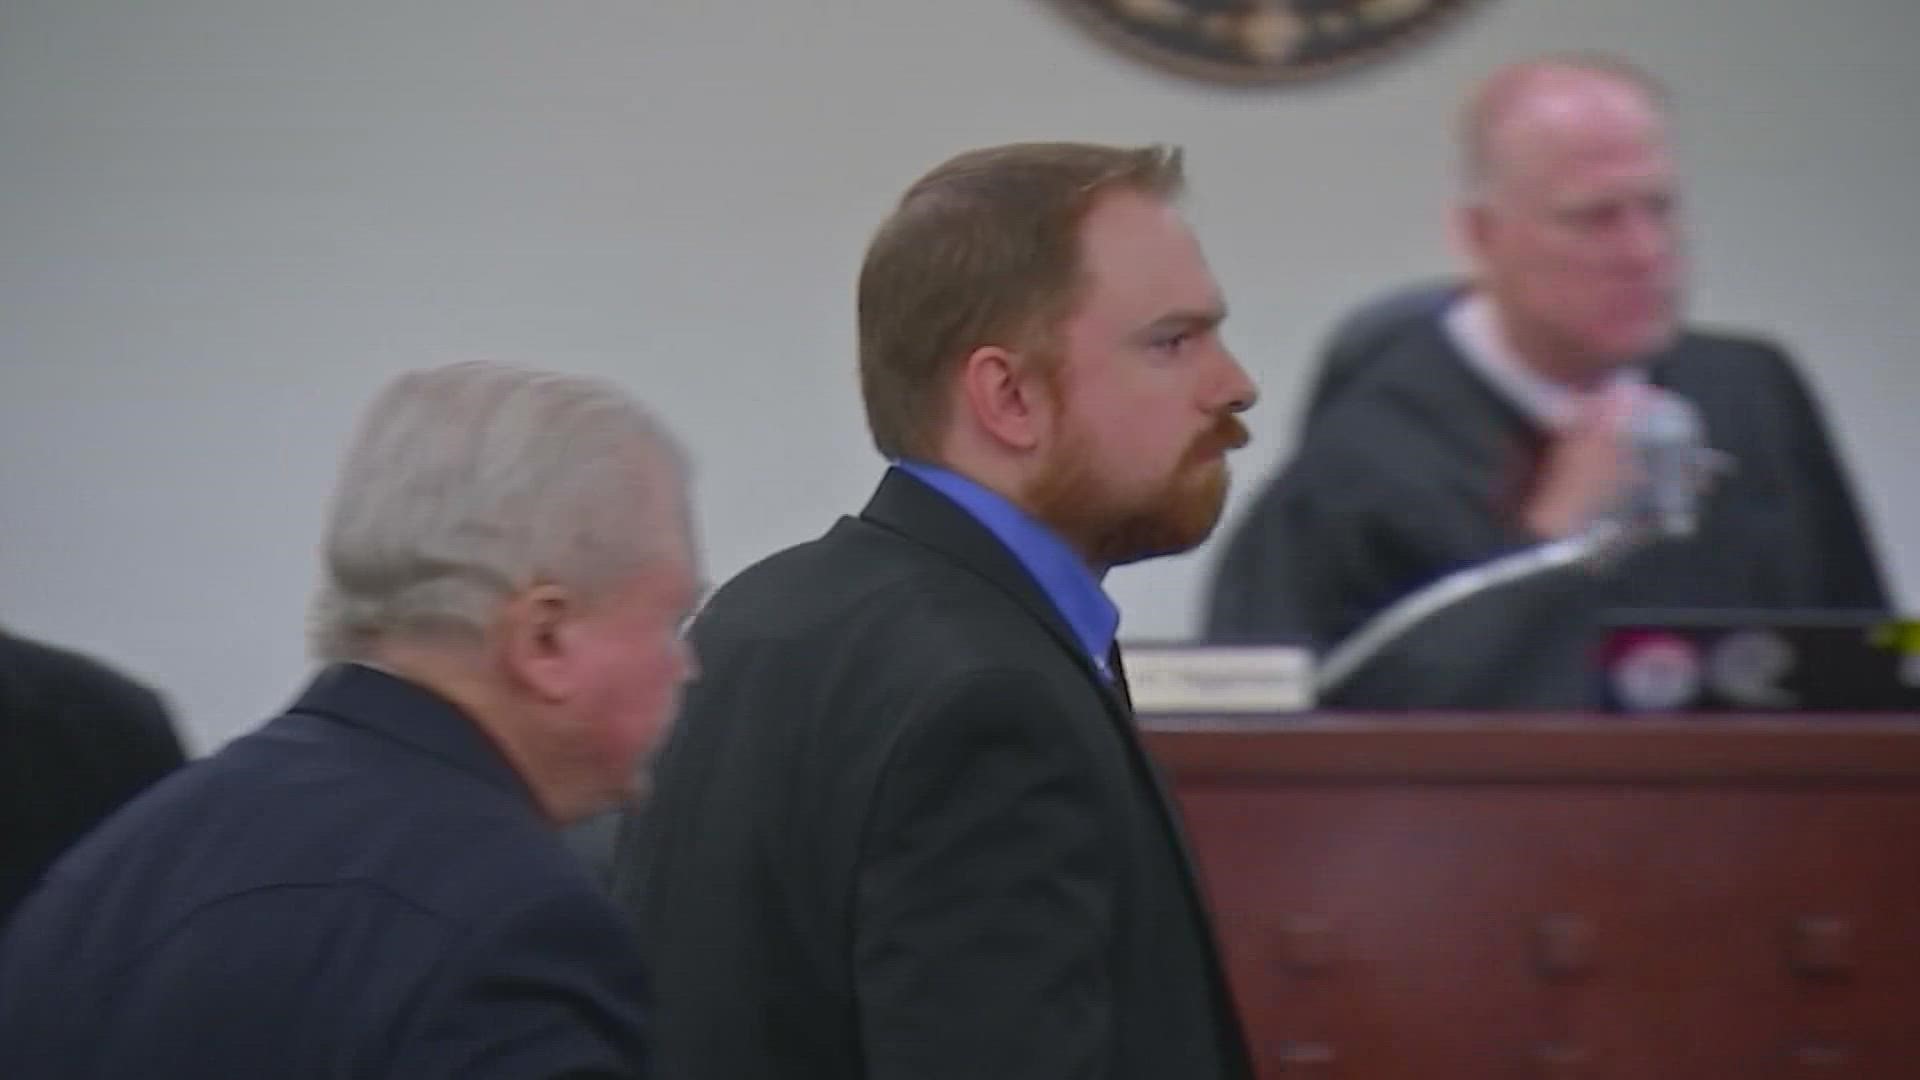 Jury selection in the Aaron Dean trial was set to earlier, but it was delayed after the sudden death of the lead defense attorney Jim Lane.